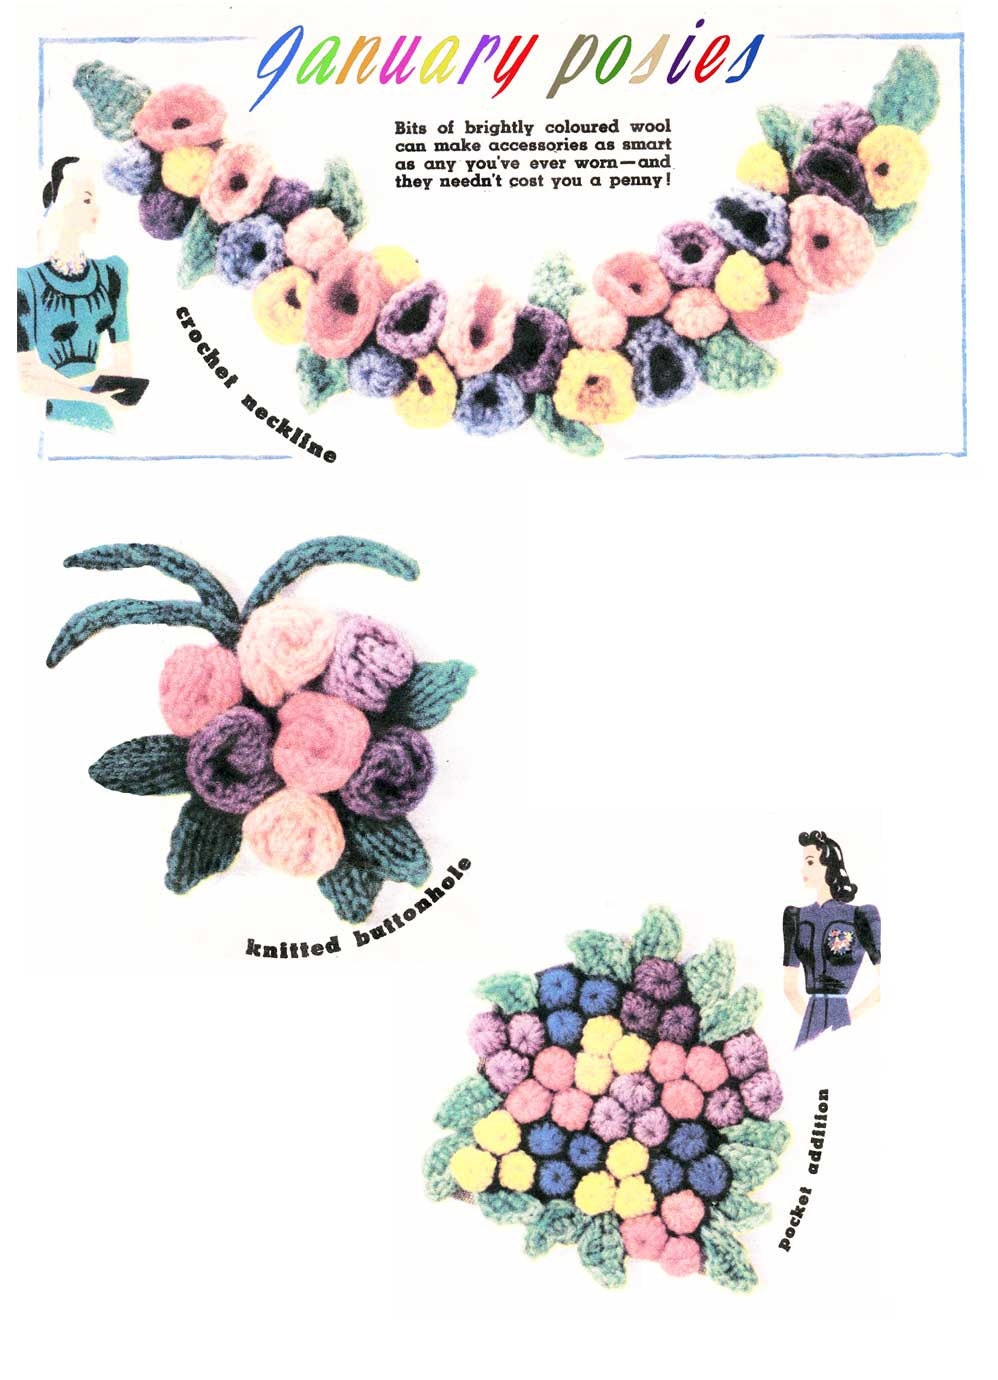 Style Craft, January Posies / Corsage, 40s Knitting Pattern and Crochet Pattern, January Posies